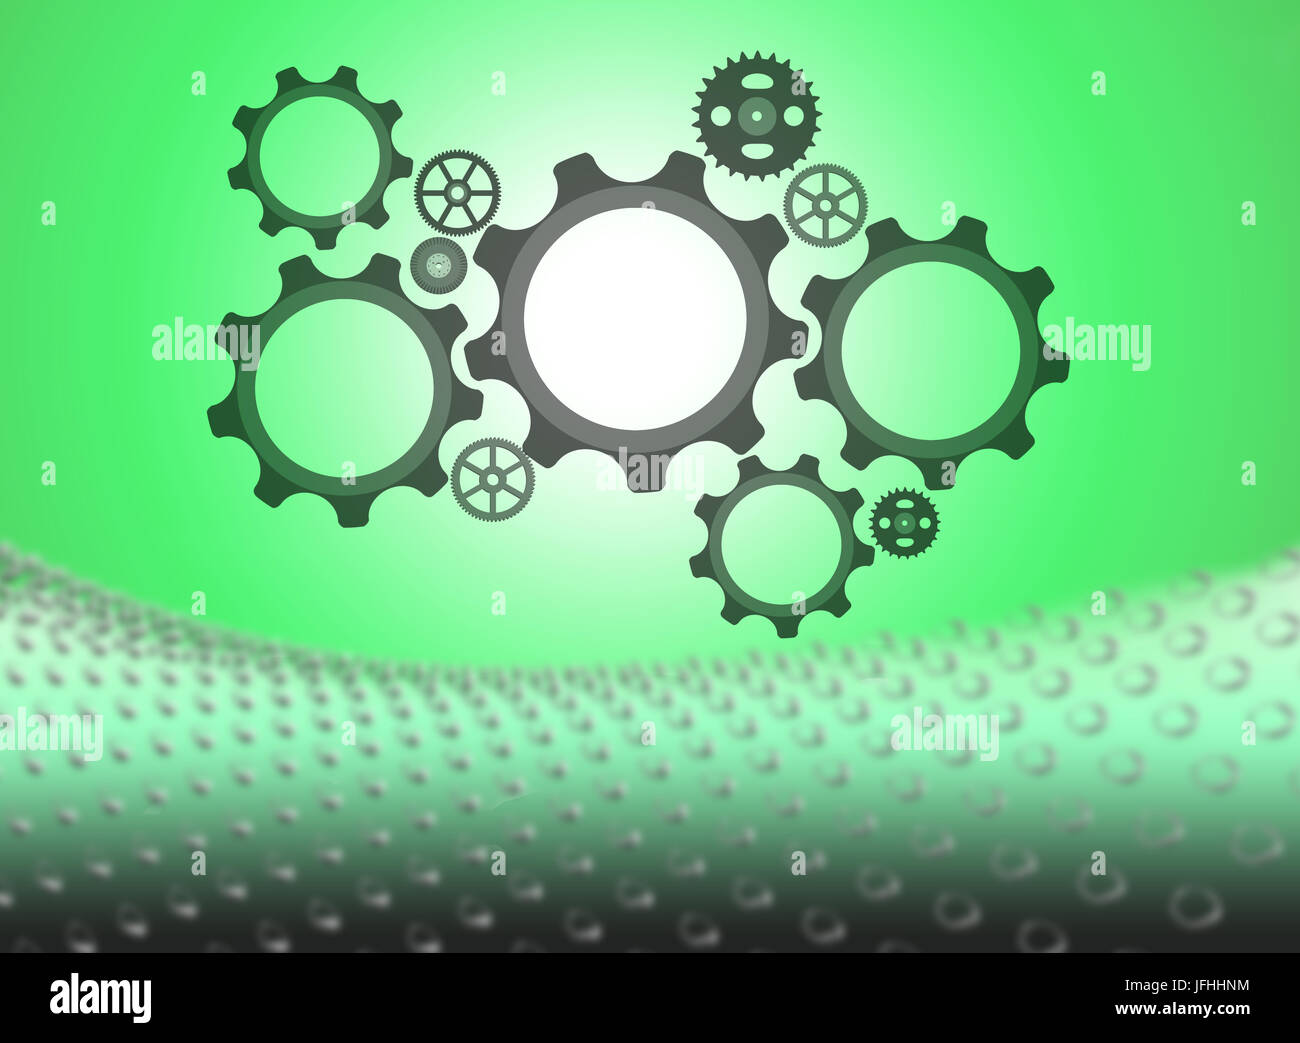 Flaying gears on green background Stock Photo